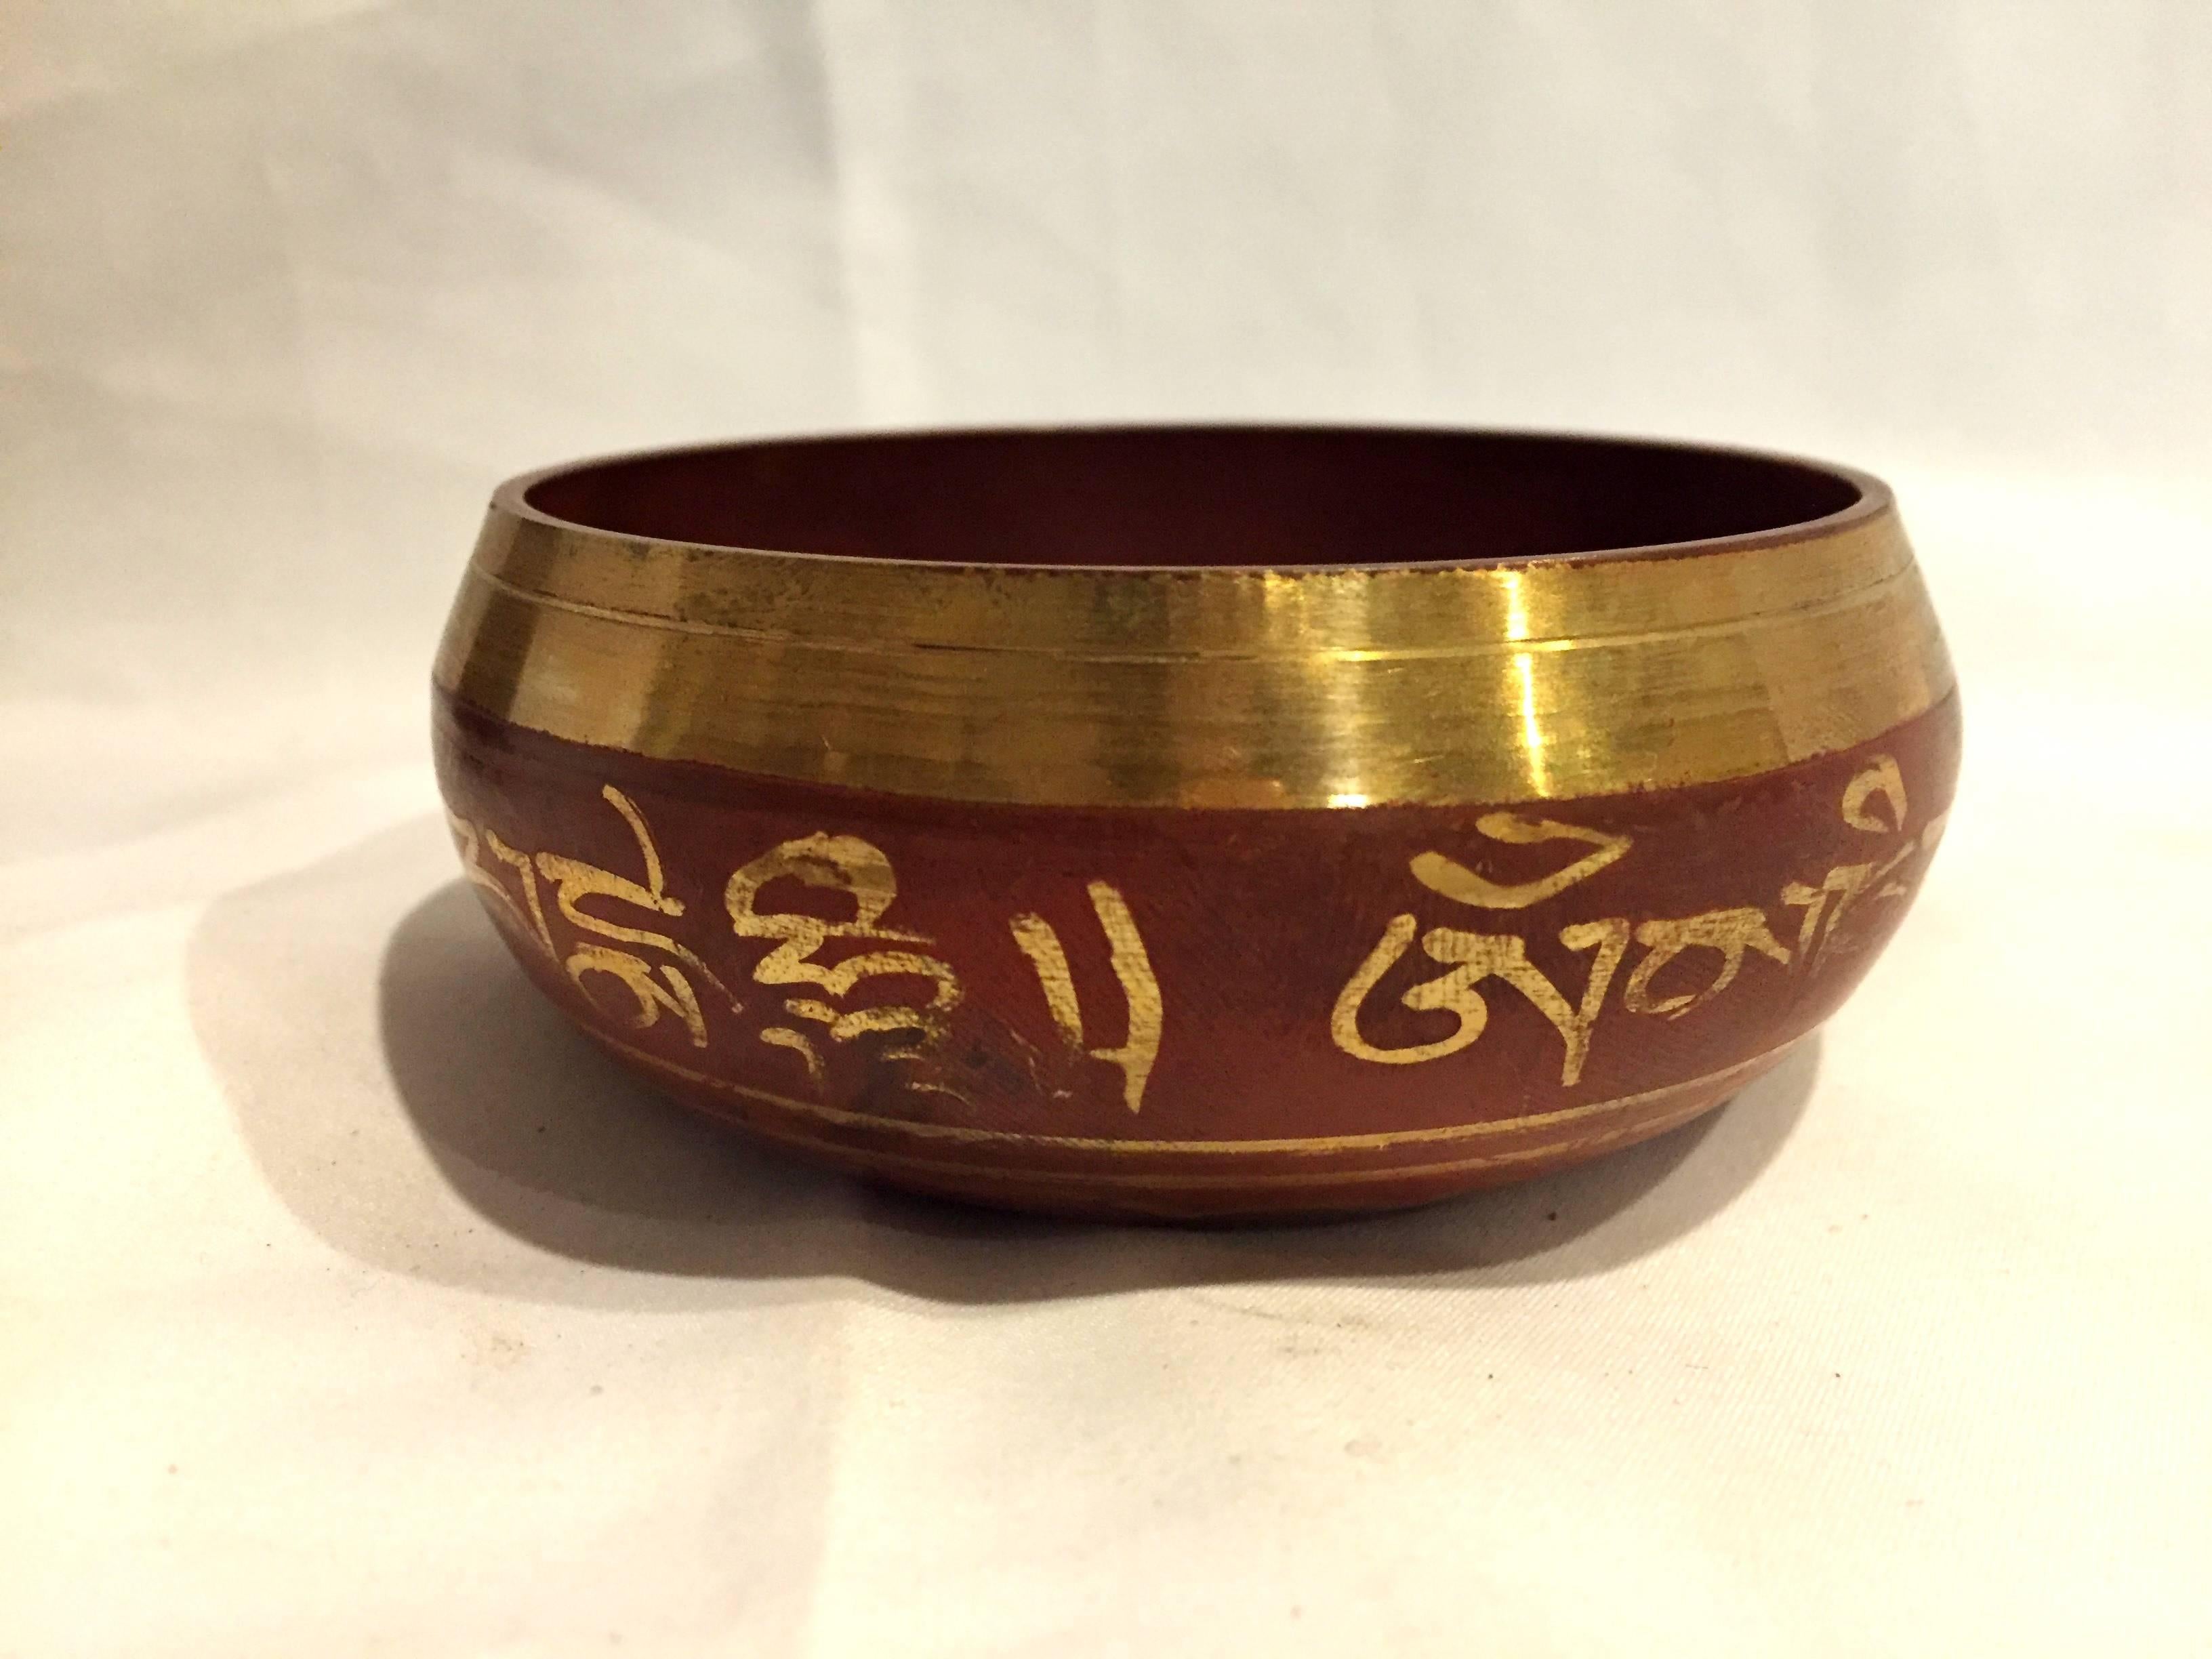 Included in this fantastic collection are the following:

A brass singing bowl with its own striker. The bowl has wonderful, raised center in the form of two Dorjes, which are ritual objects used in ceremonies symbolizing enlightenment. 4